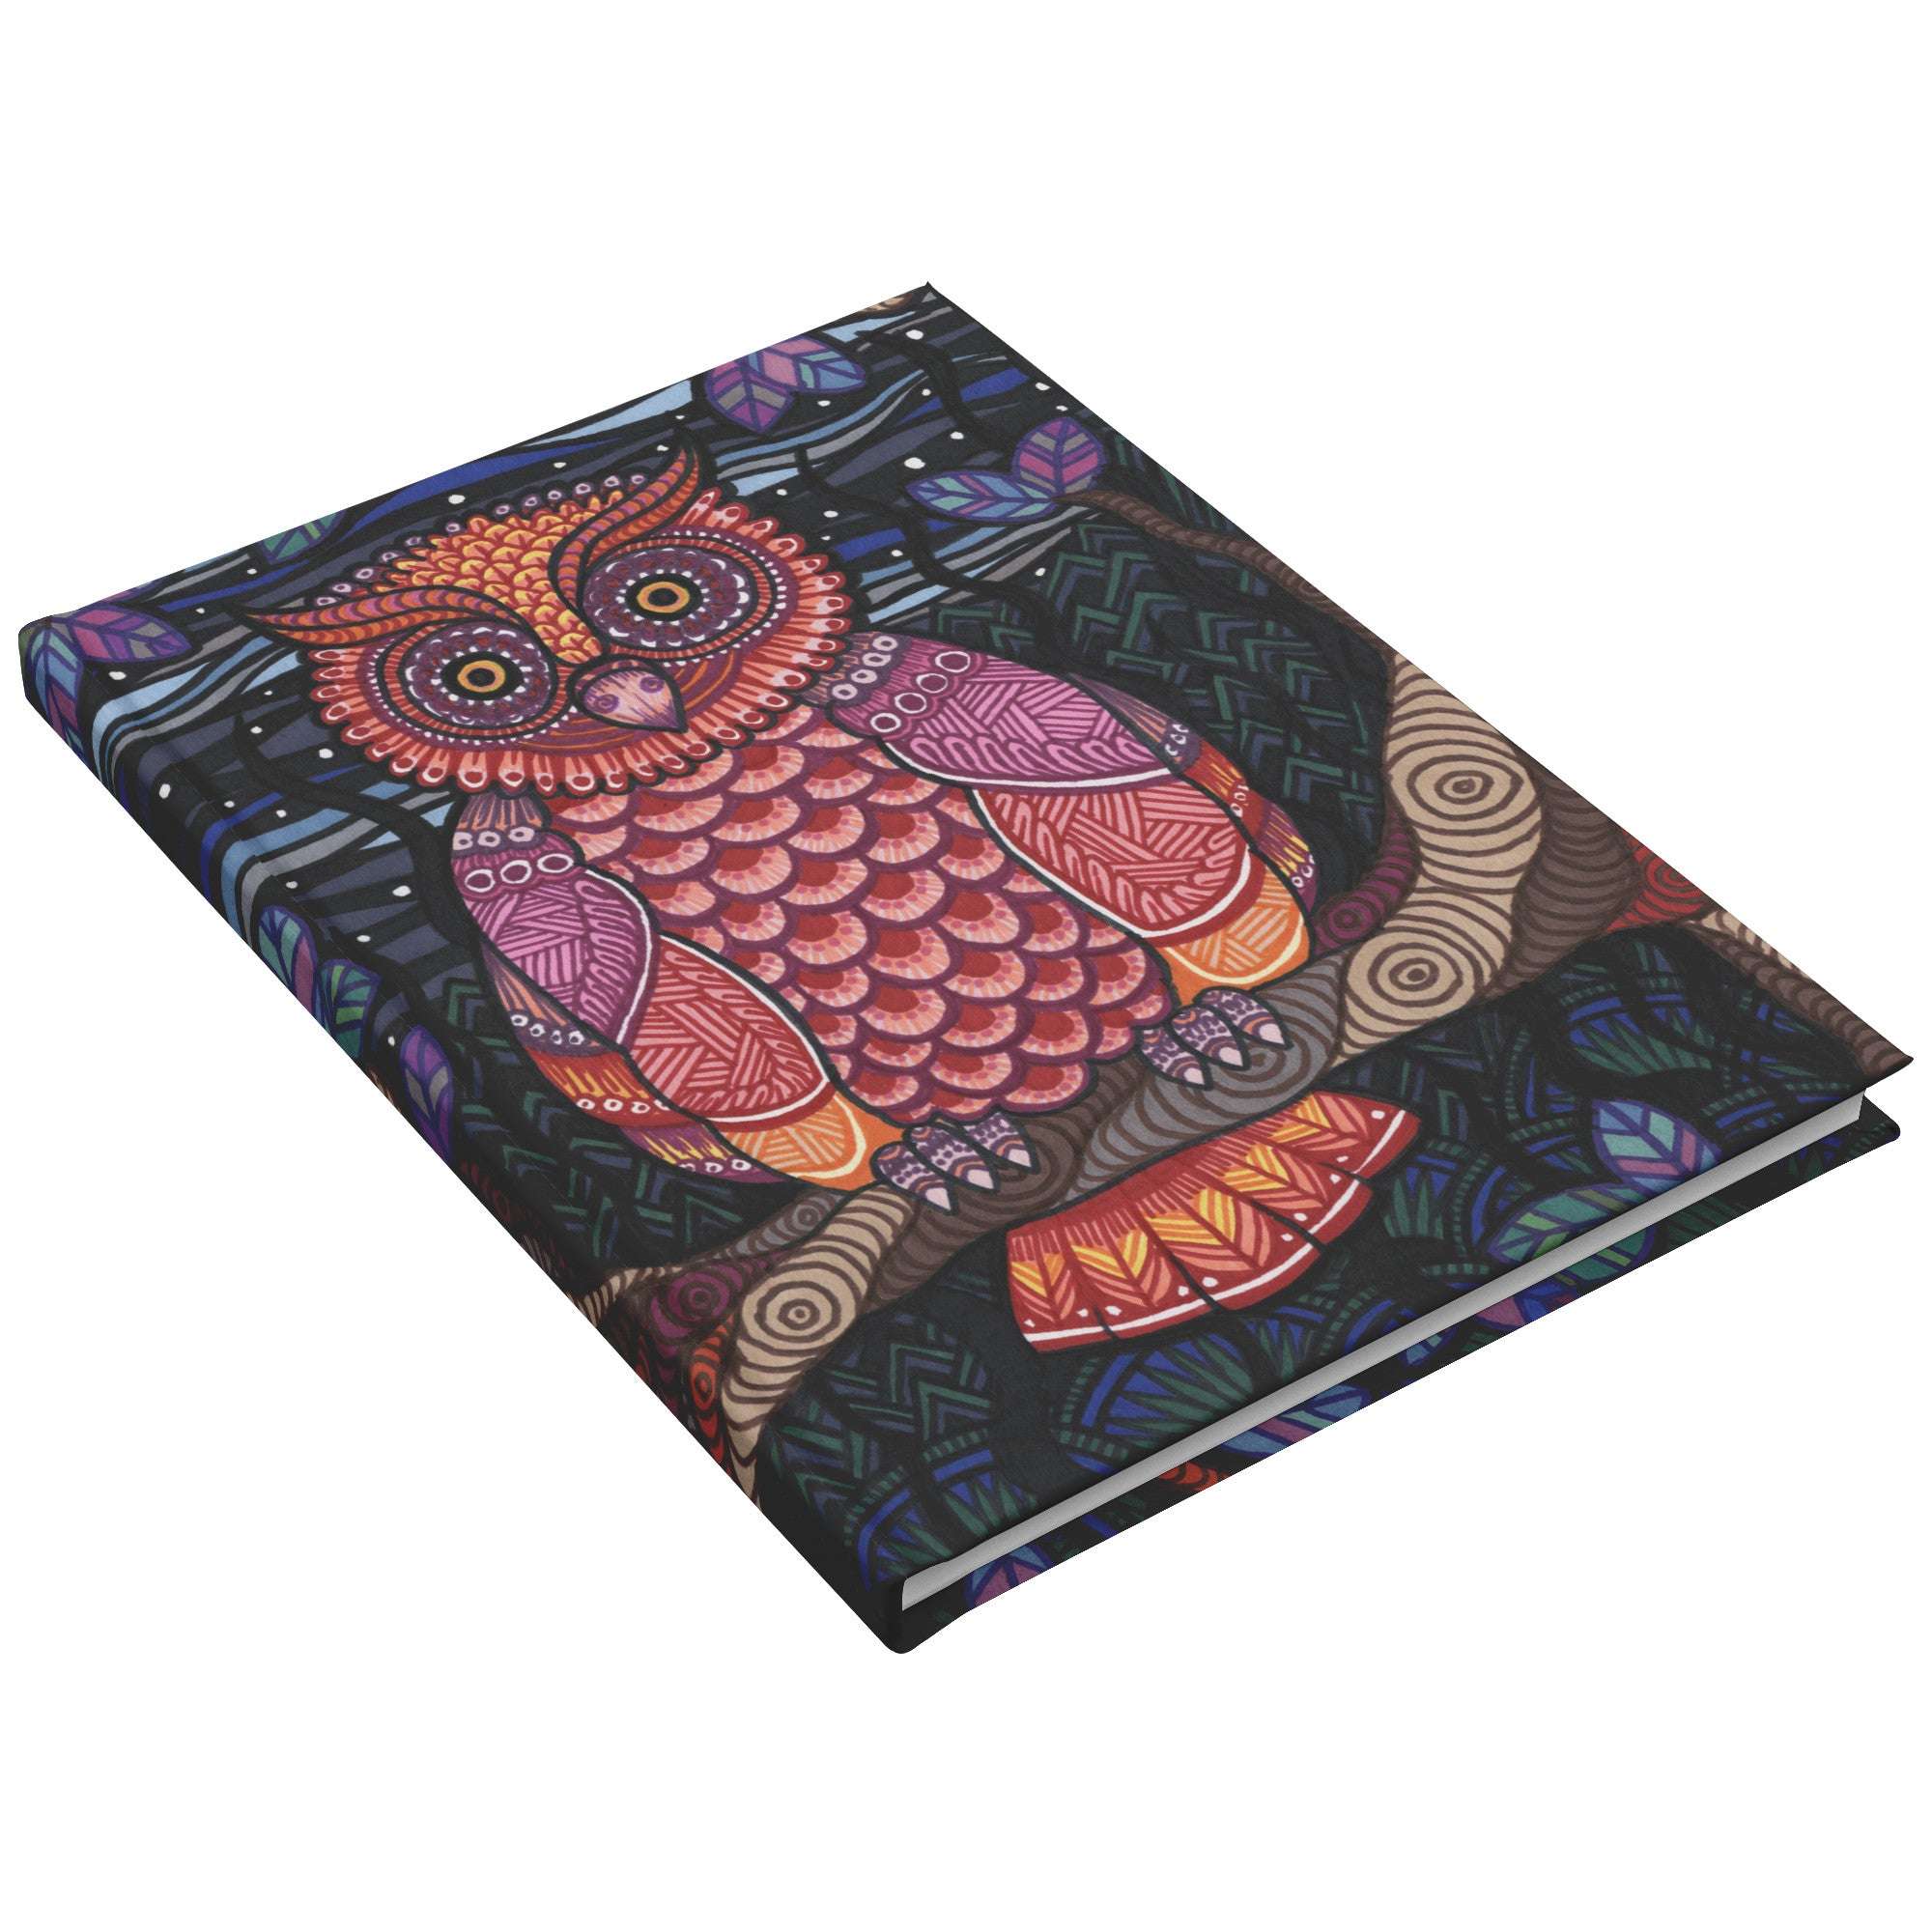 A colorful Owl Tree Journal with a detailed illustration of a vibrant owl perched on a branch against a dark background.